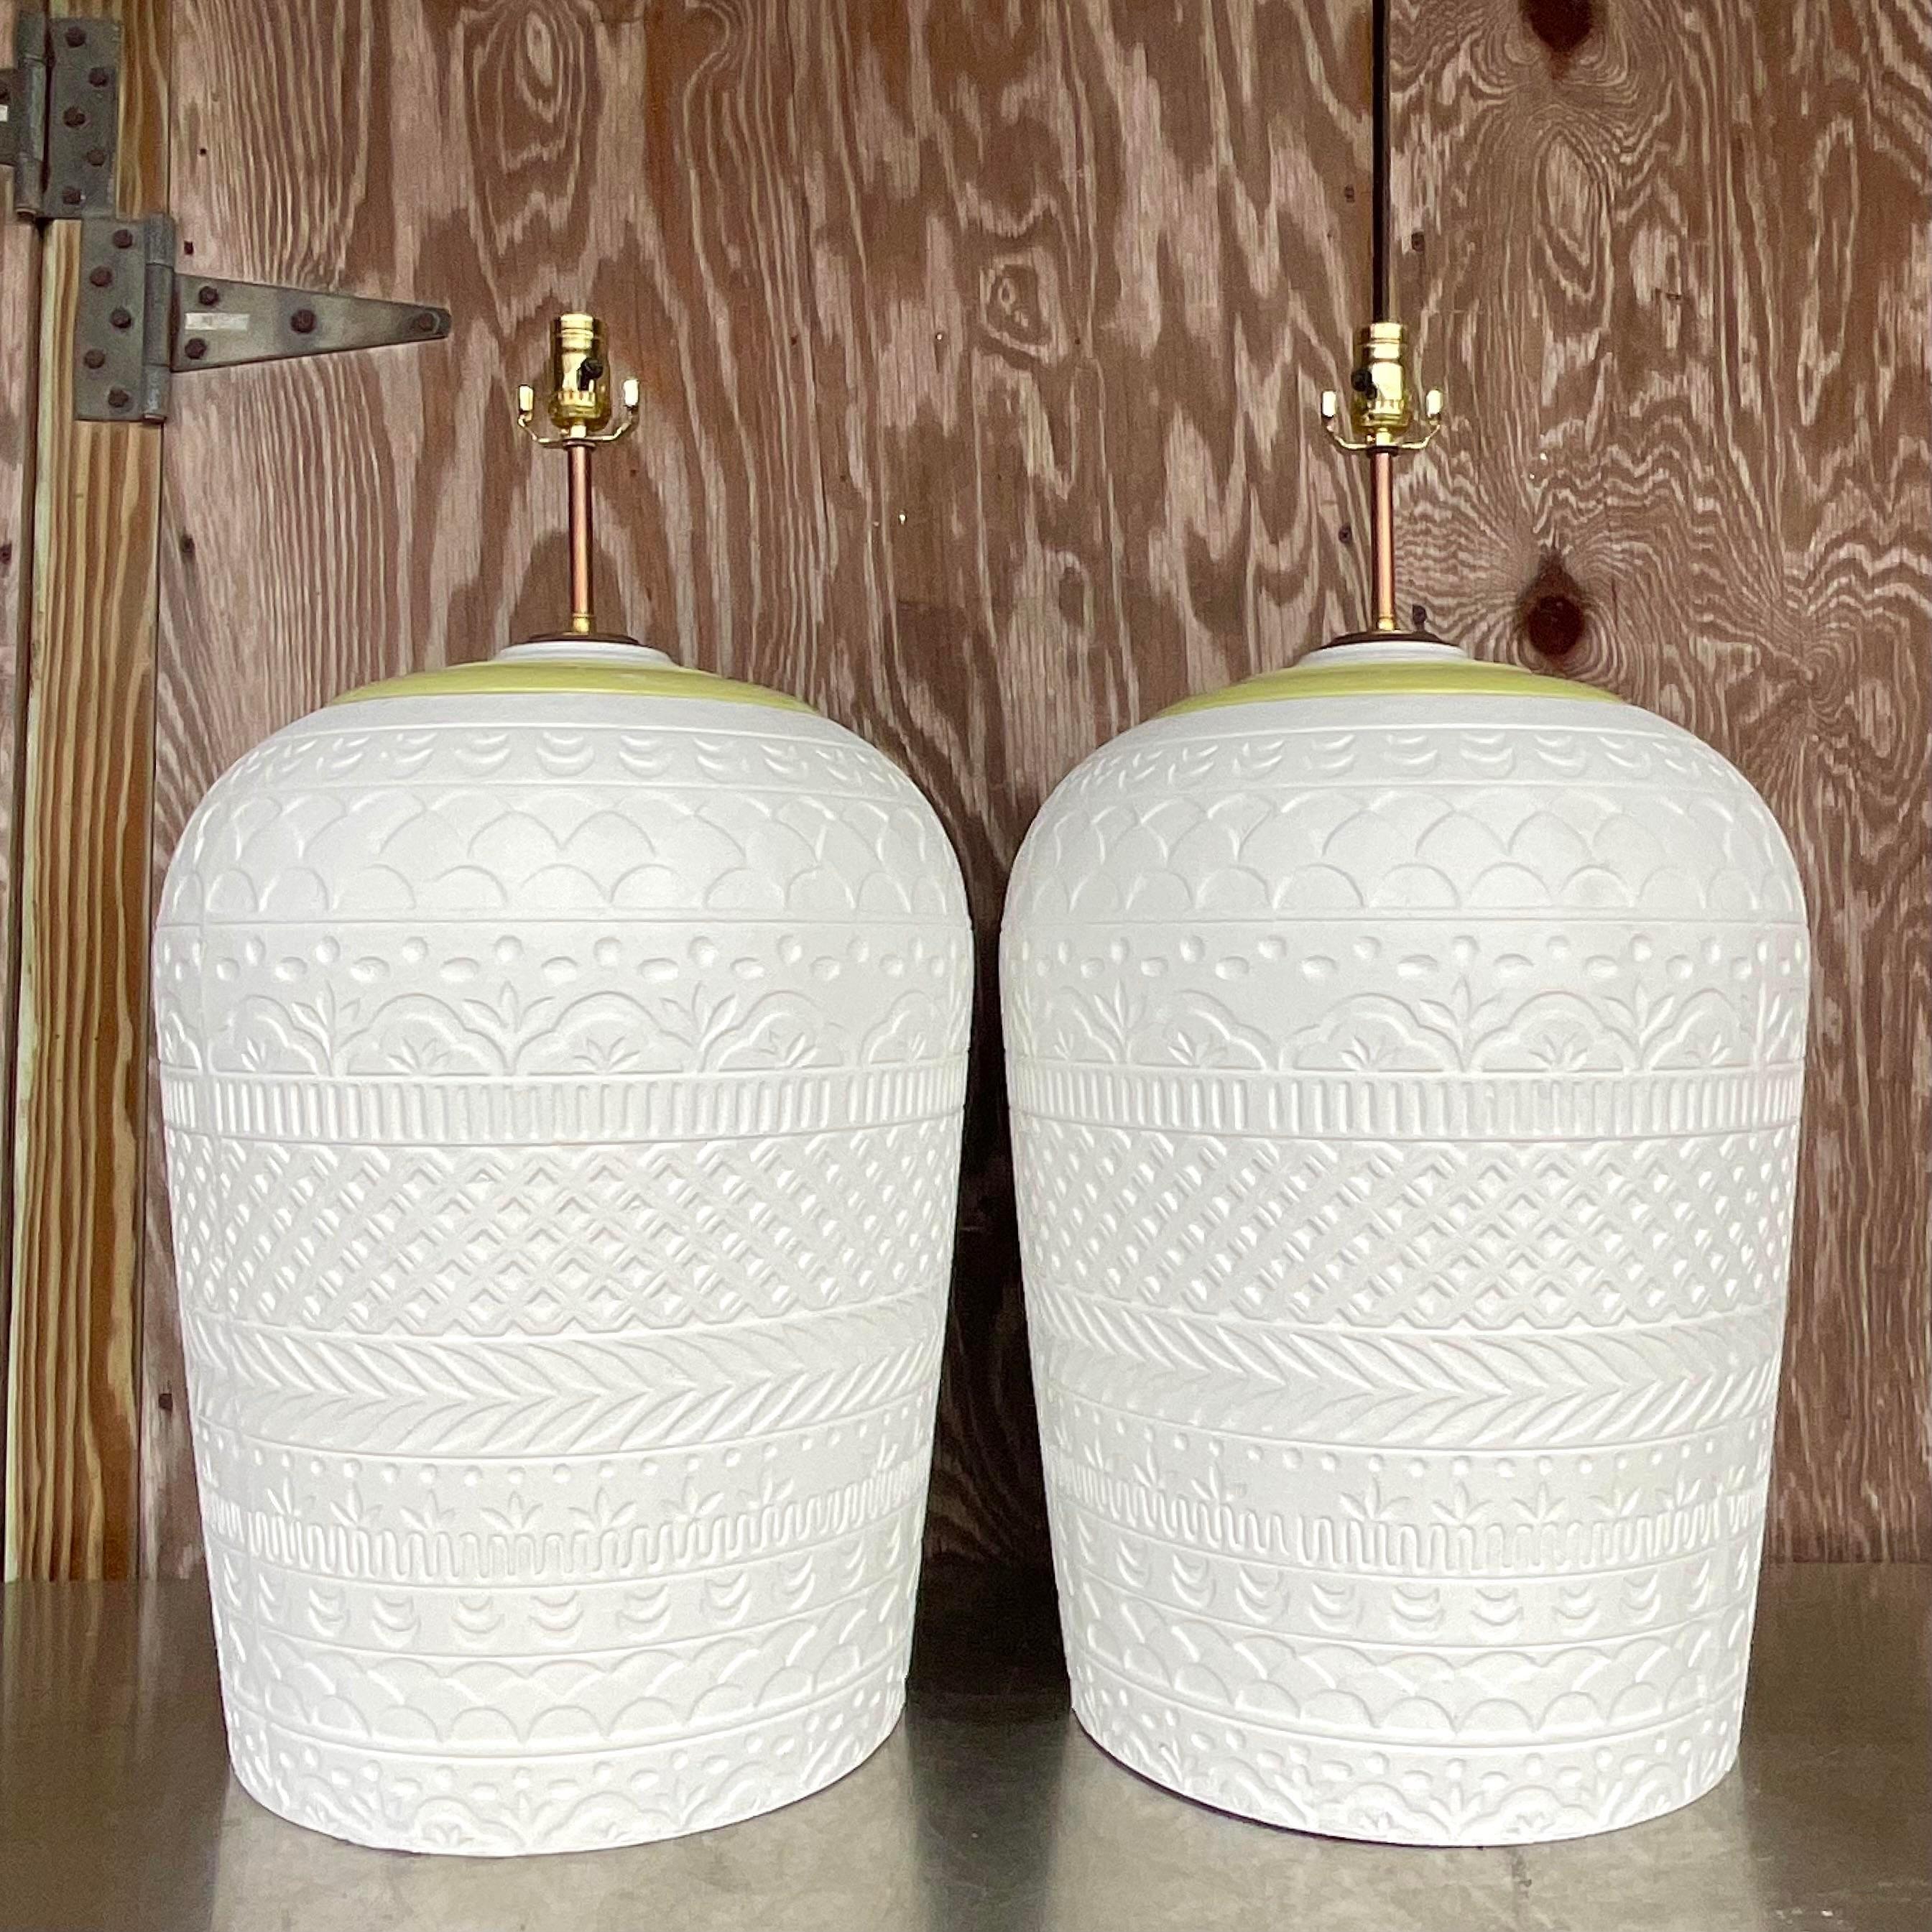 A fabulous pair of vintage Boho table lamps. A chic wrap around relief in plaster. Fully restored with all new wiring and hardware. Acquired from a Palm Beach estate